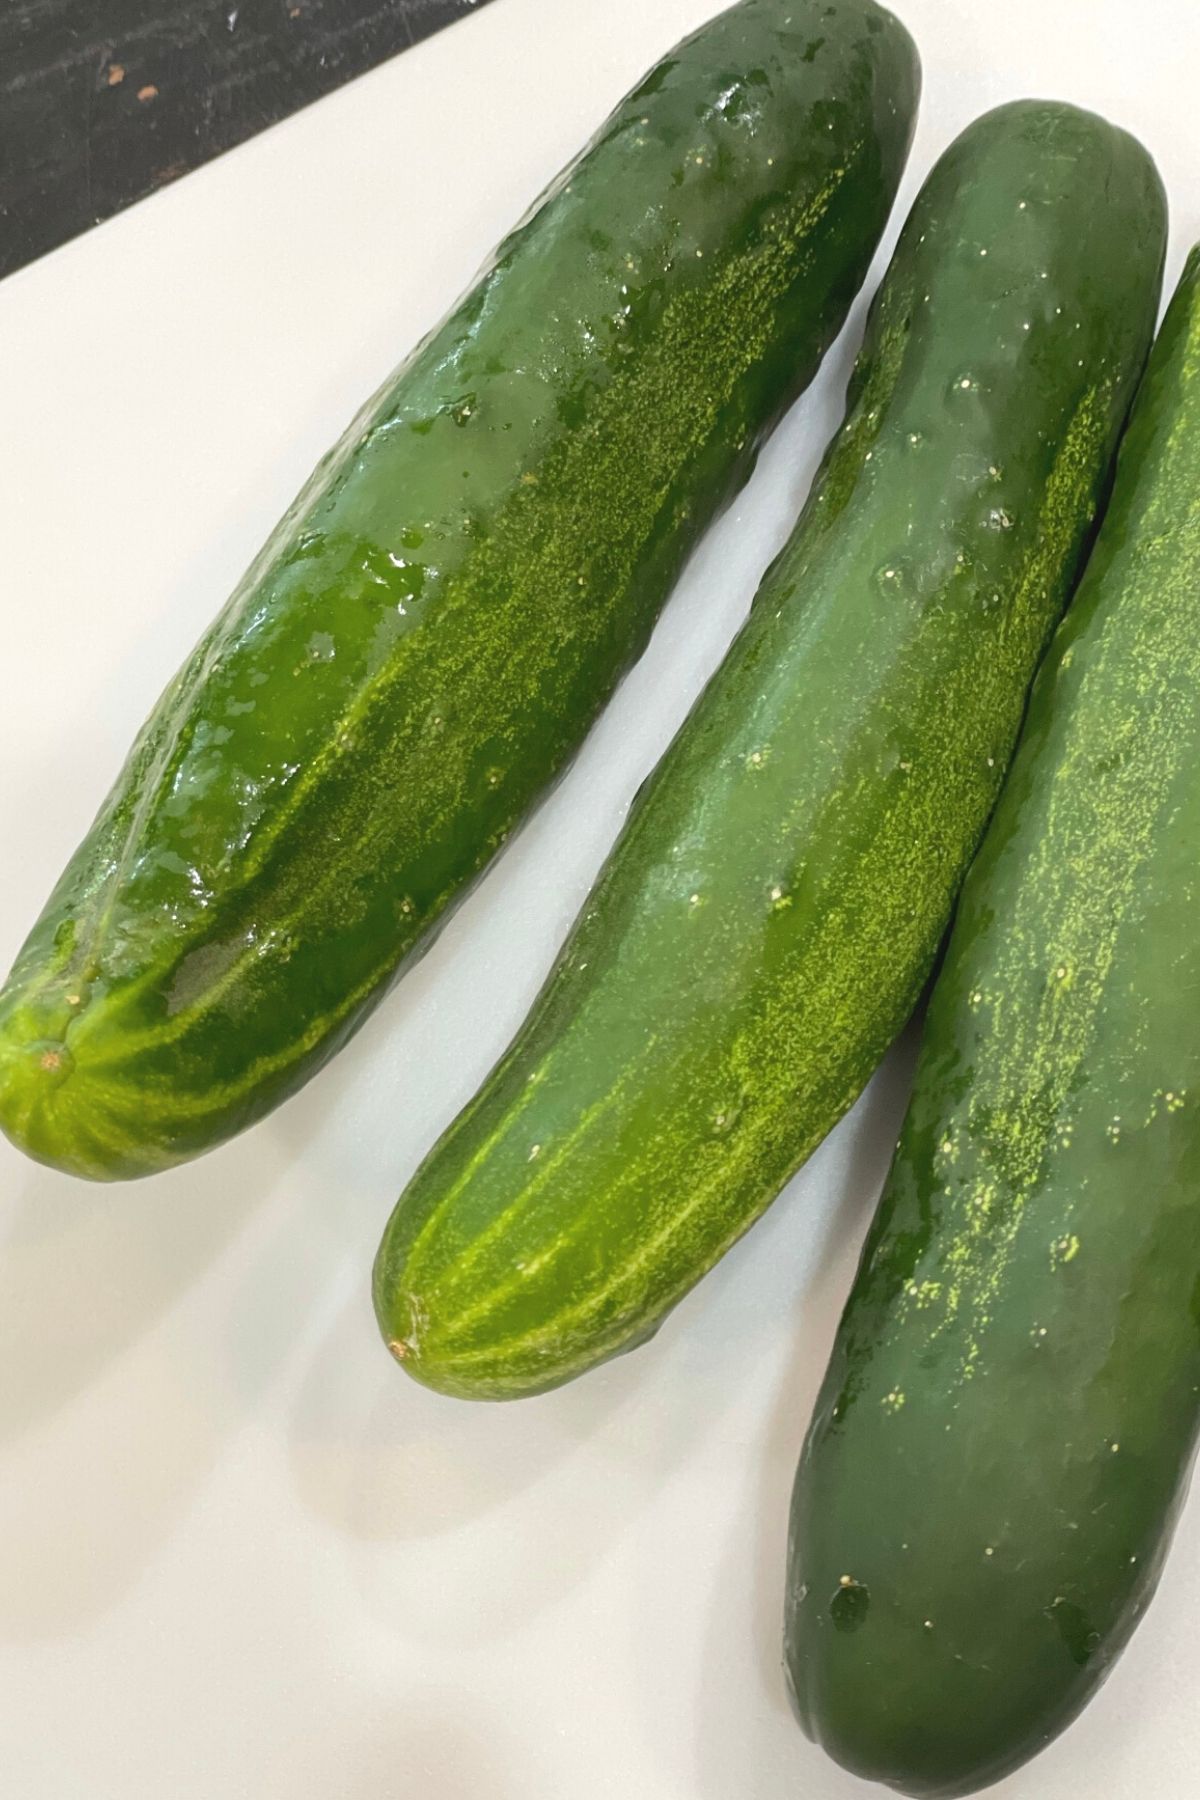 Three large, fresh cucumbers ready to peel and slice.